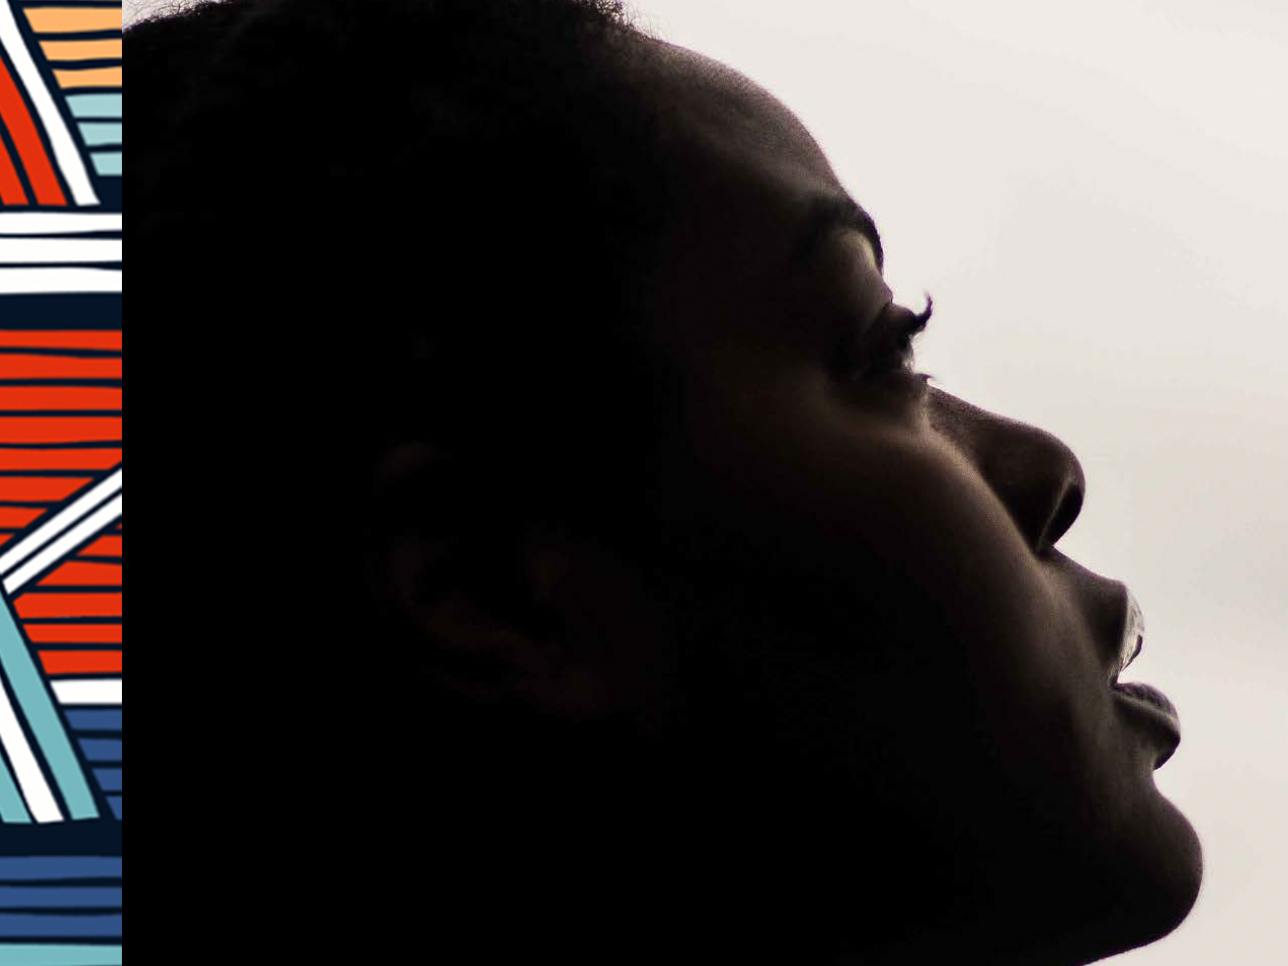 A Black woman in profile with a graphic element down the side